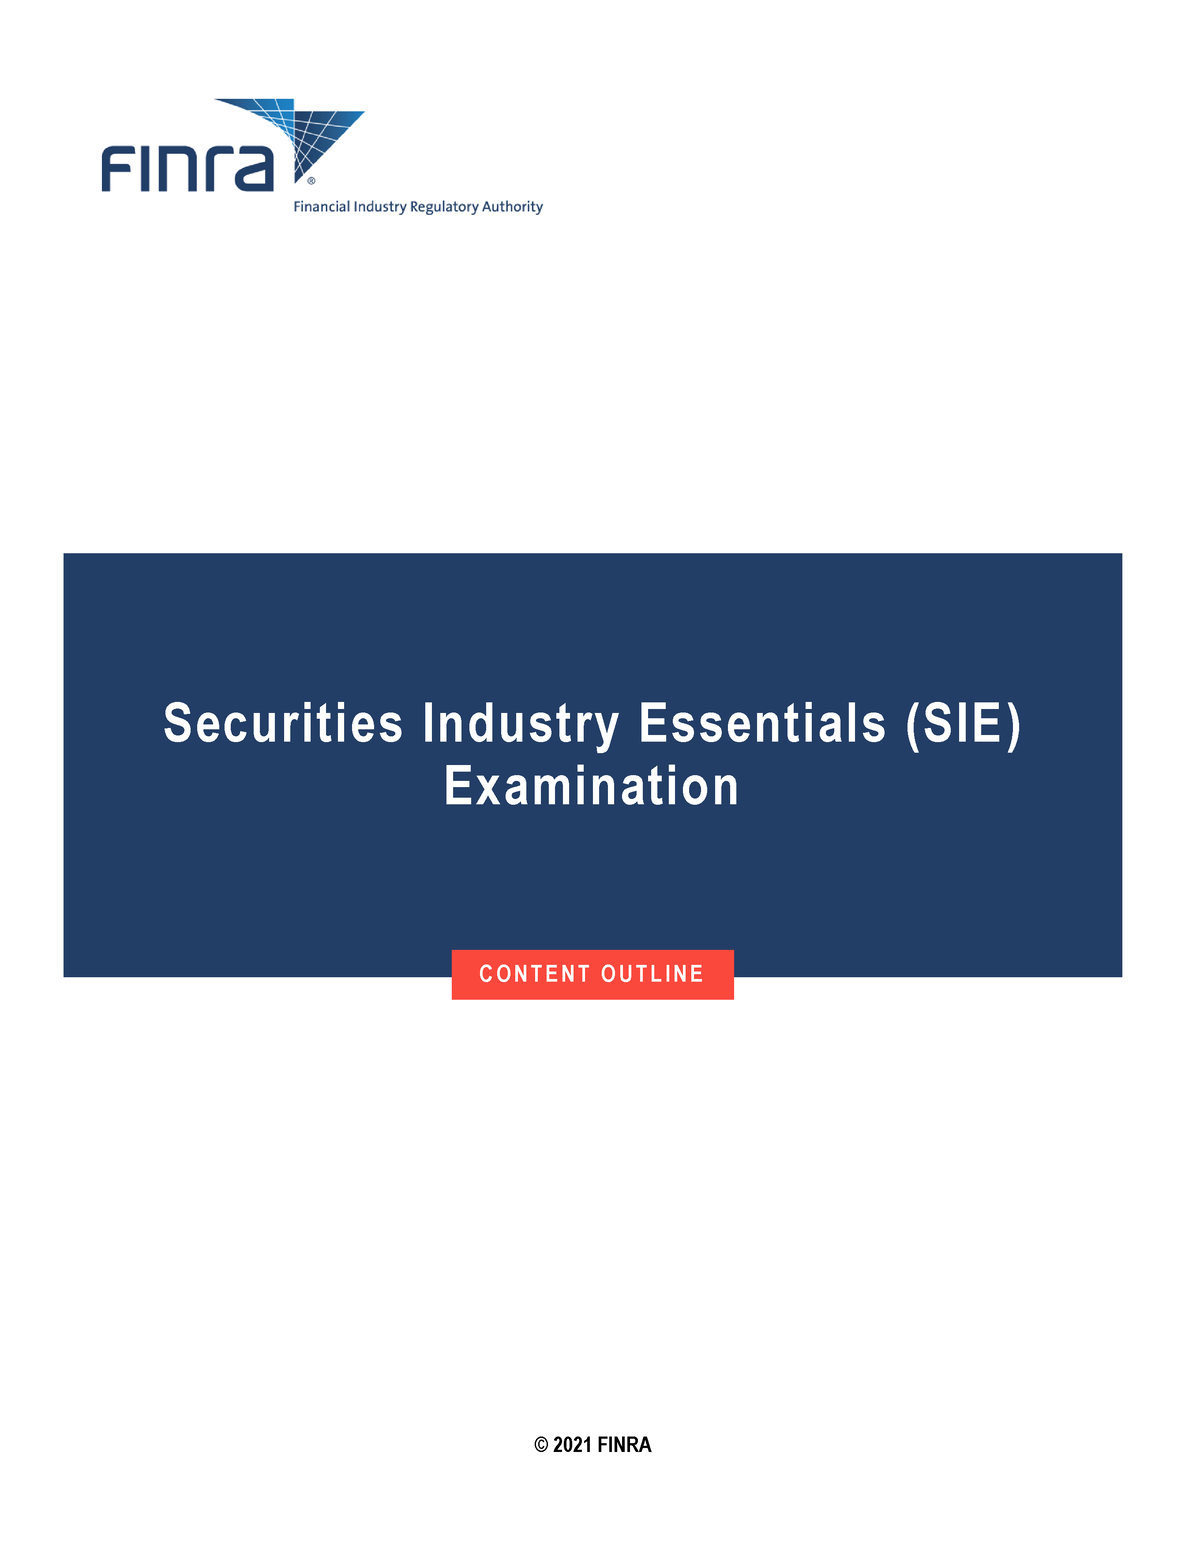 SIE Content Outline dd adfs adfdfds afds © 2021 FINRA Securities